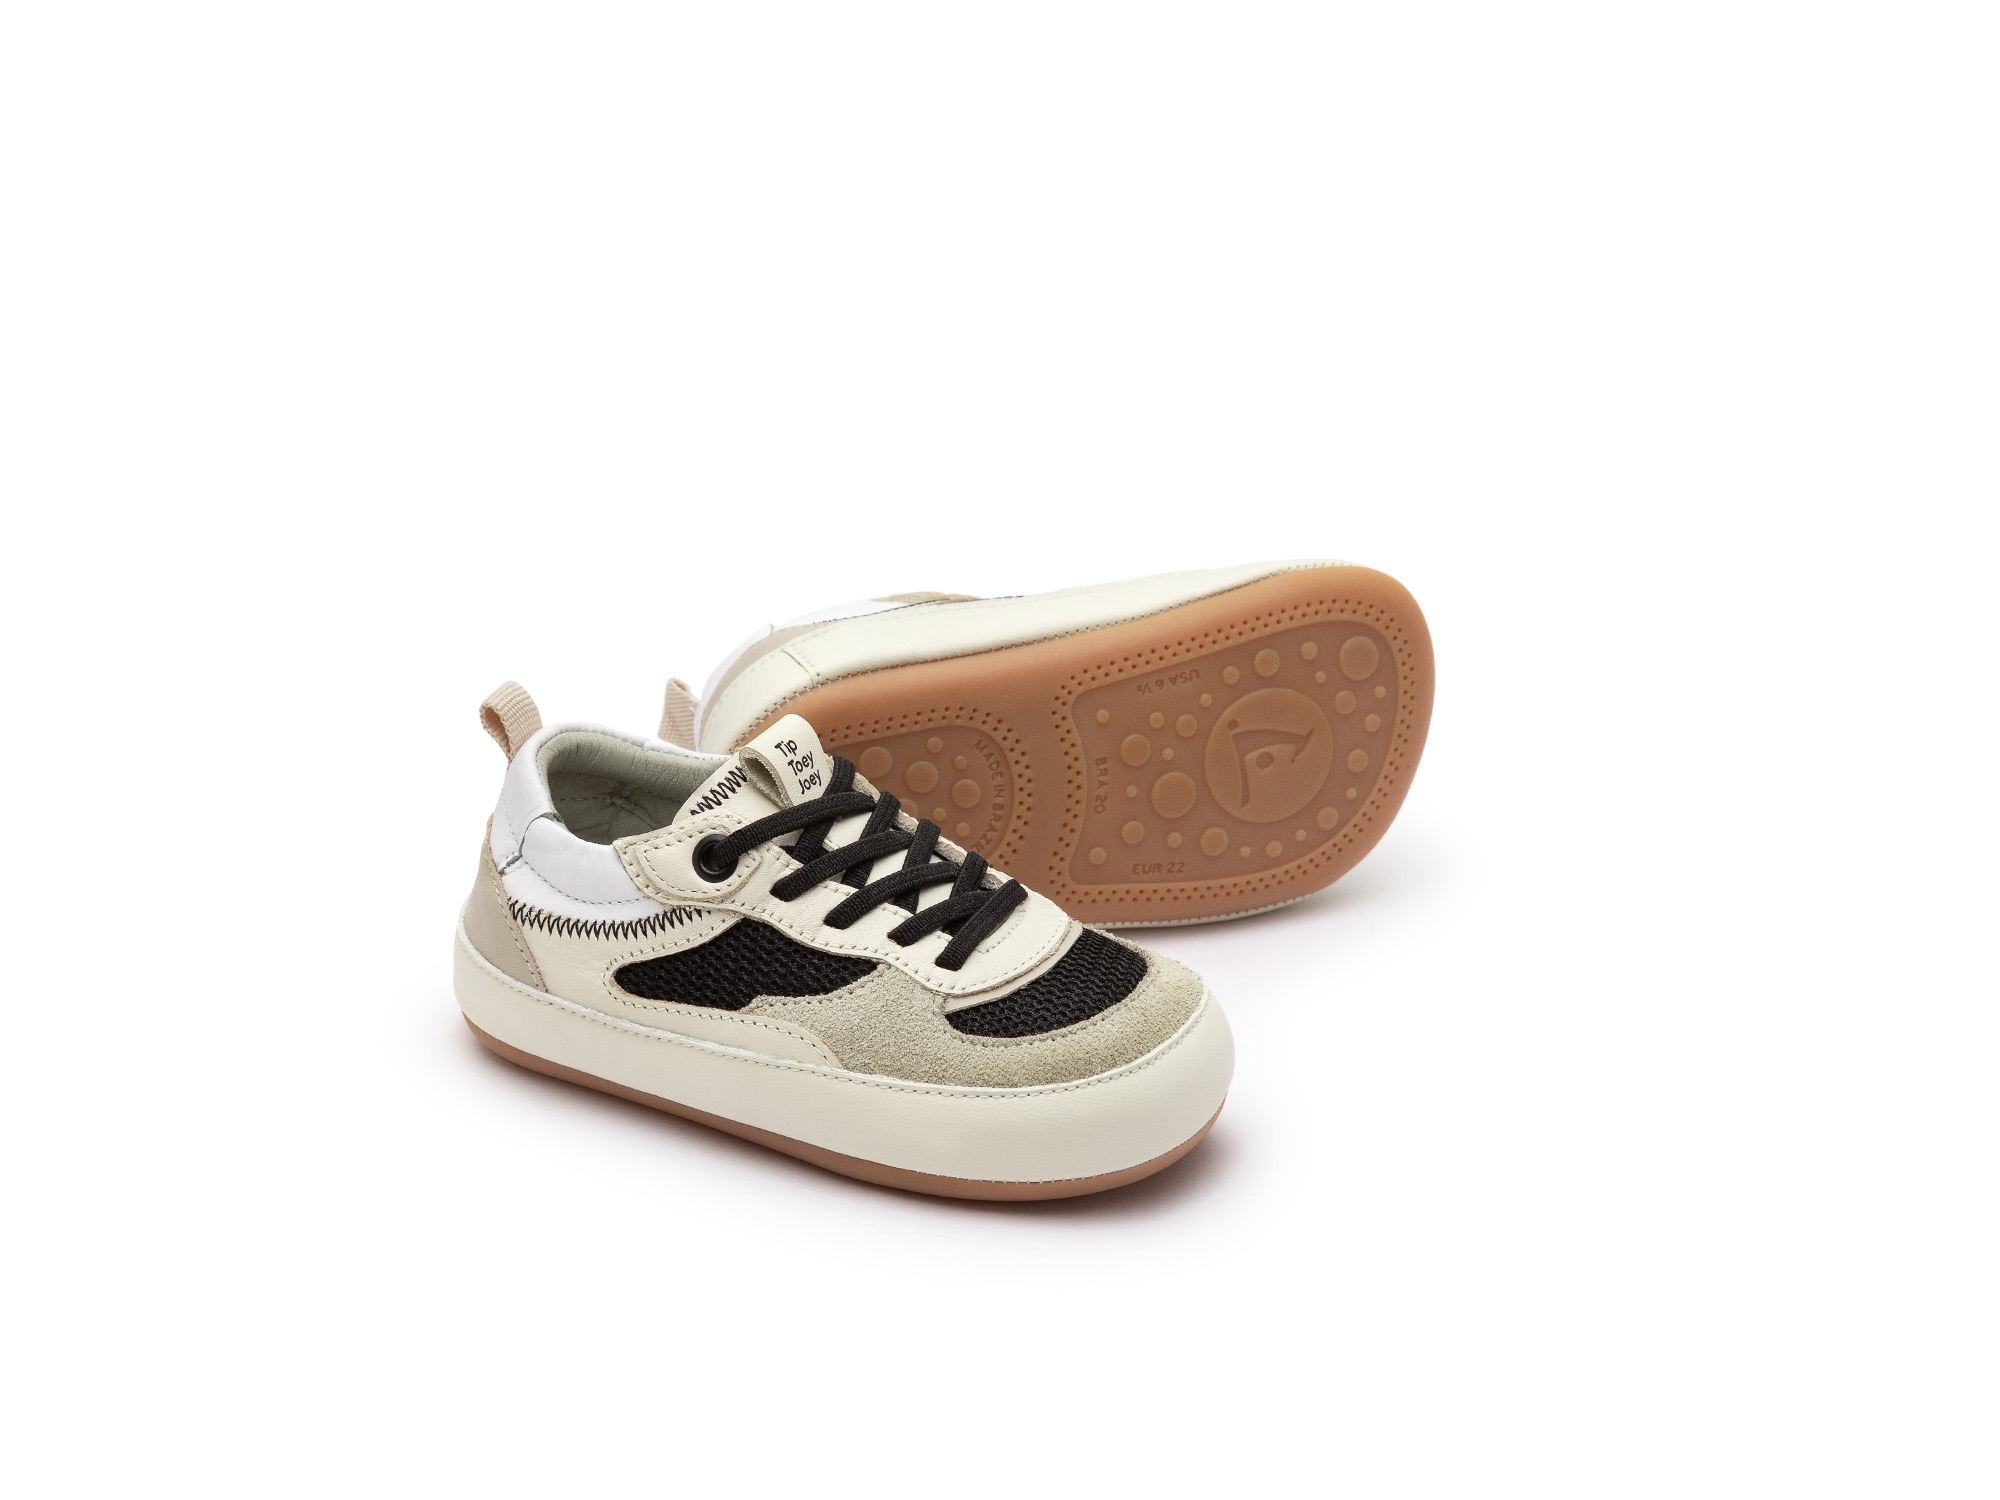 UP & GO Sneakers for Boys Step | Tip Toey Joey - Australia - 0